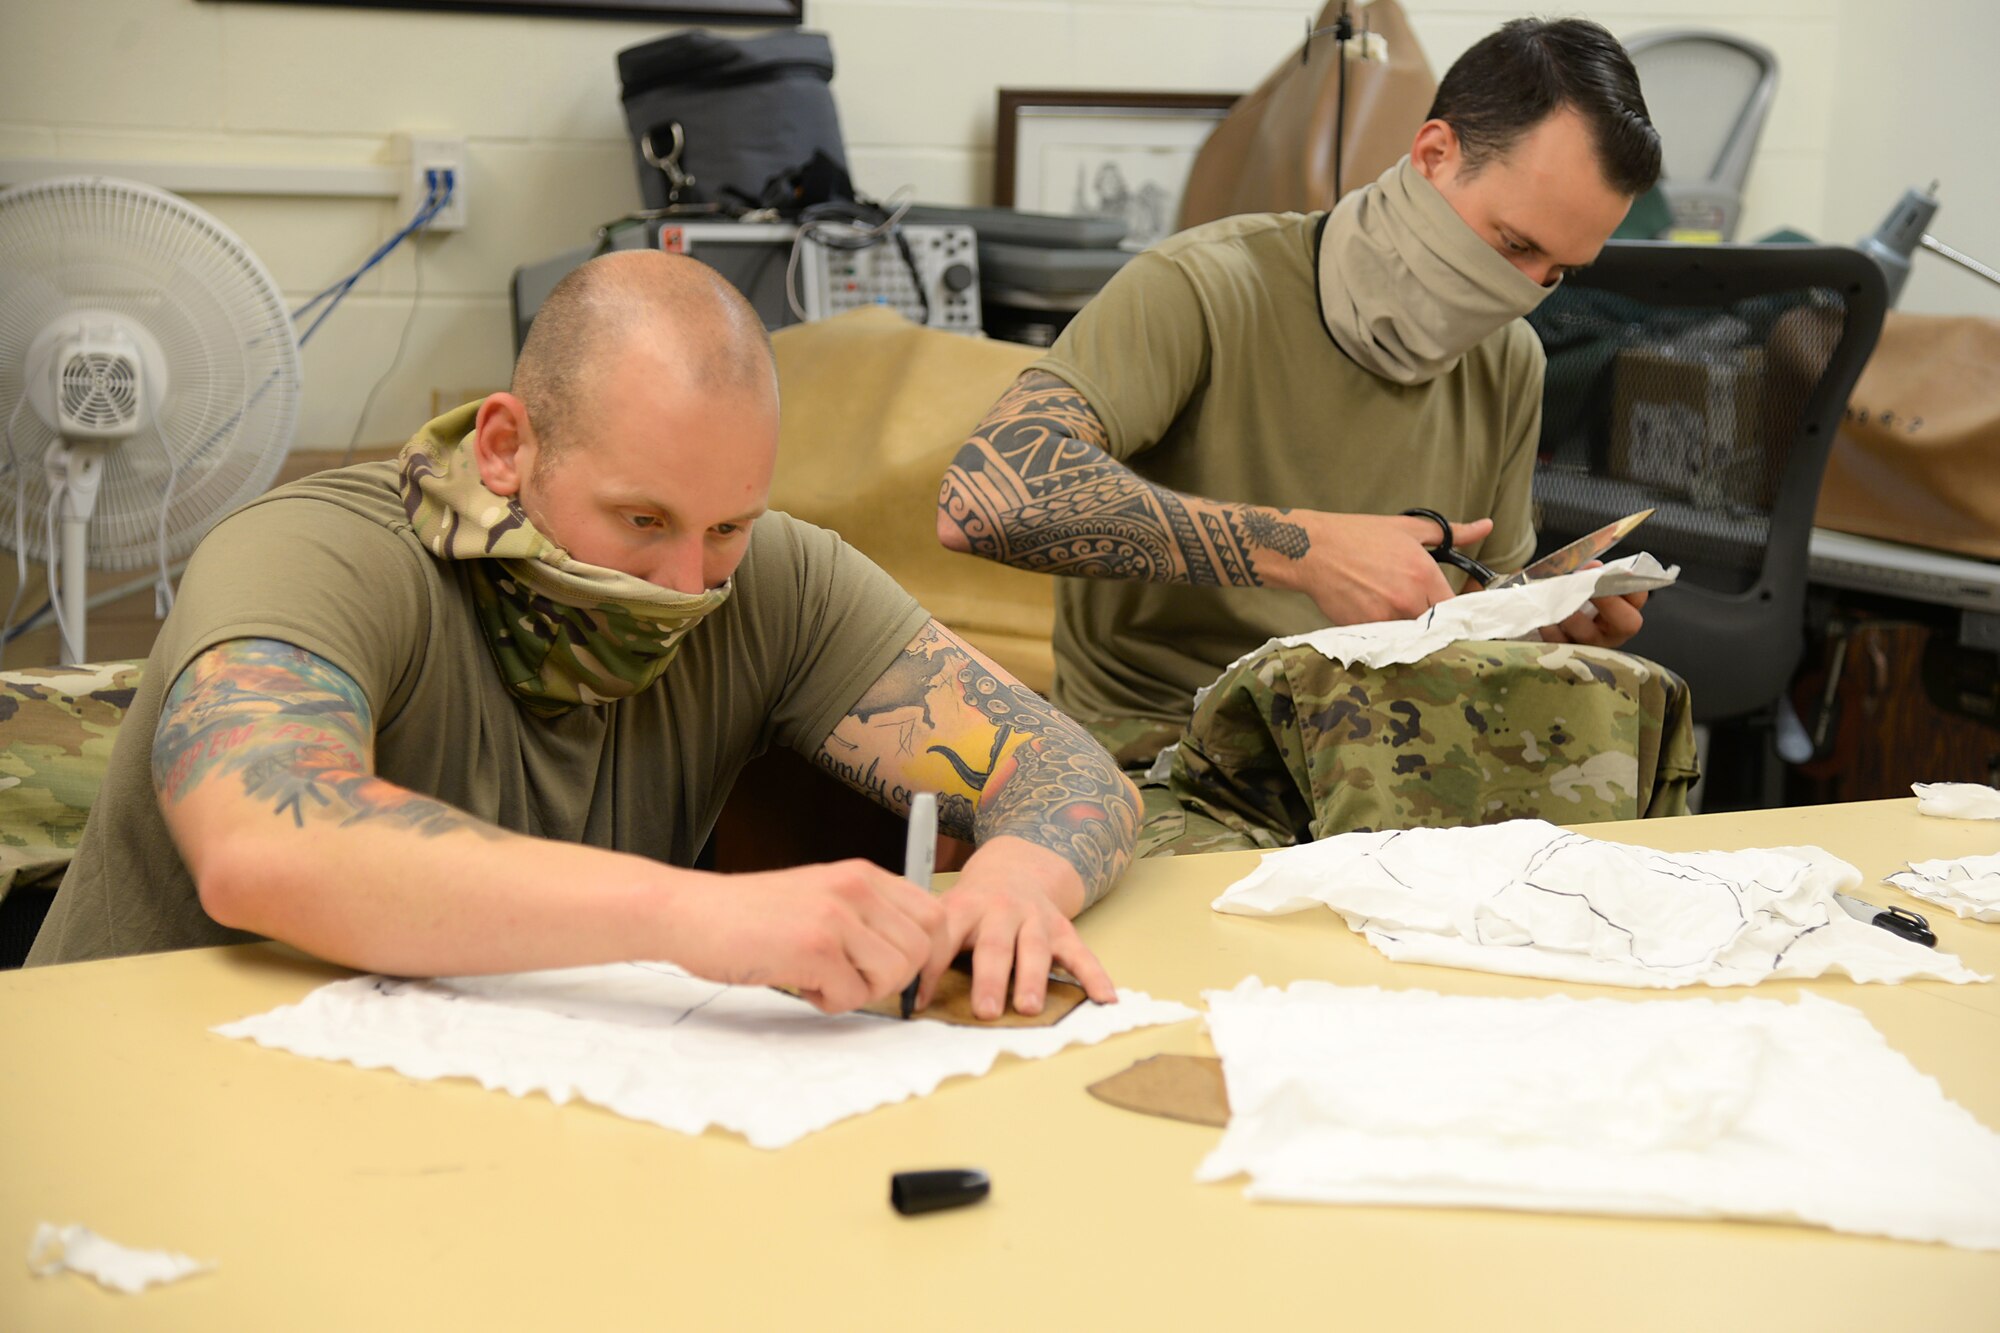 U.S. Air Force Senior Airman Michael R. Ottaviano and Staff Sgt. Brandon M. Staines, aircraft ordinance maintenance technology (Egress) technicians, volunteering to prepare fabric for face masks